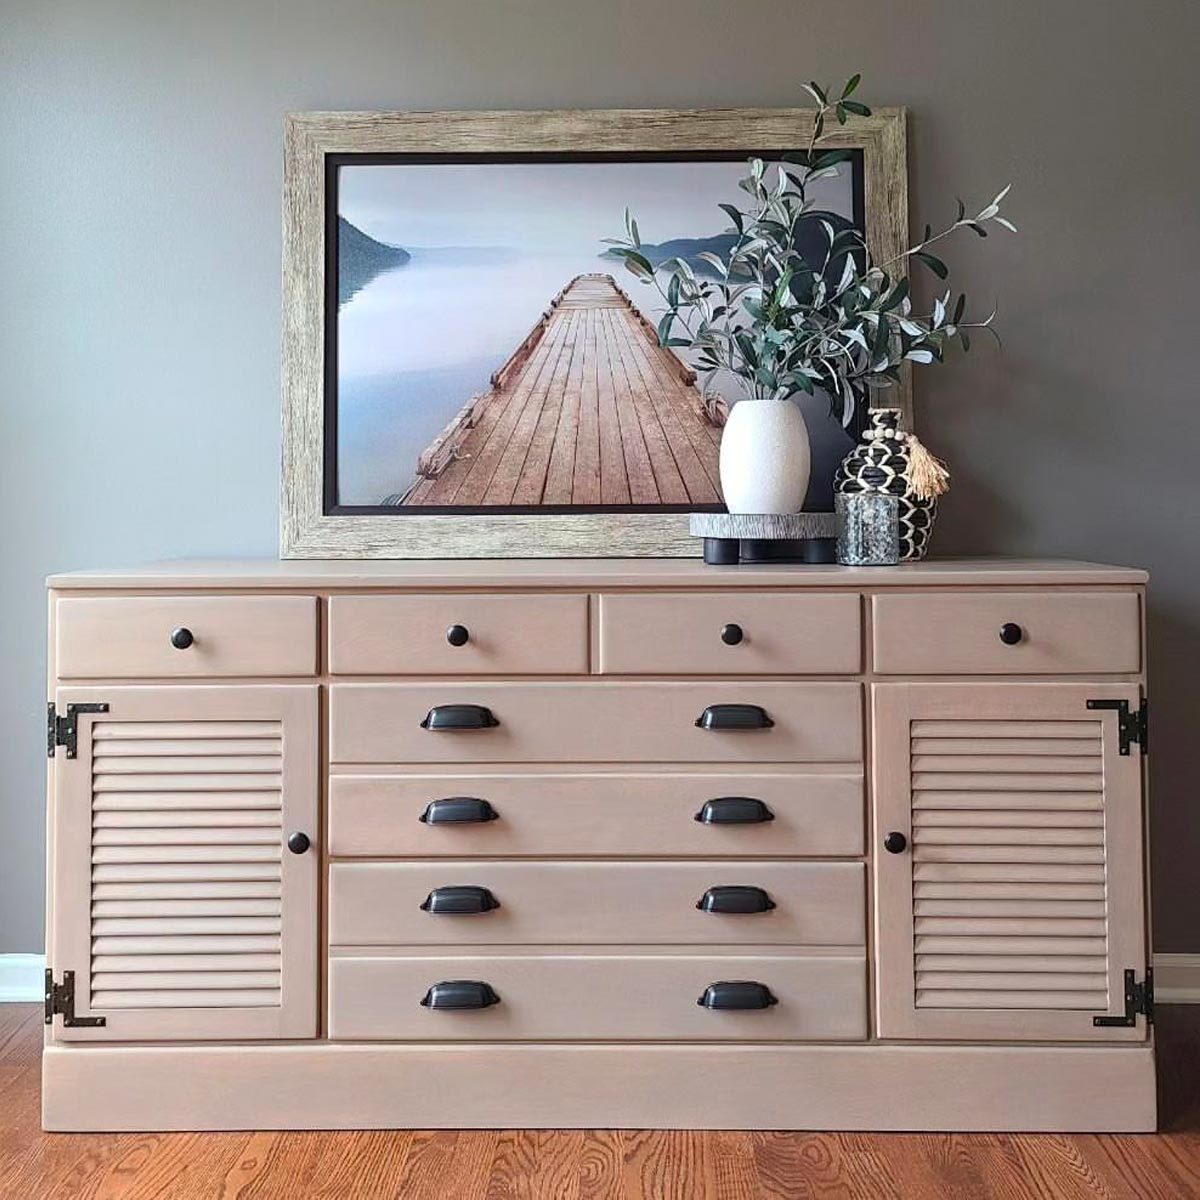 Dresser Upcycle Painted in Annie Sloan Chalk Paint Pure White, Clear Wax,…   Chalk paint furniture dresser, White chalk paint furniture, Black chalk  paint furniture